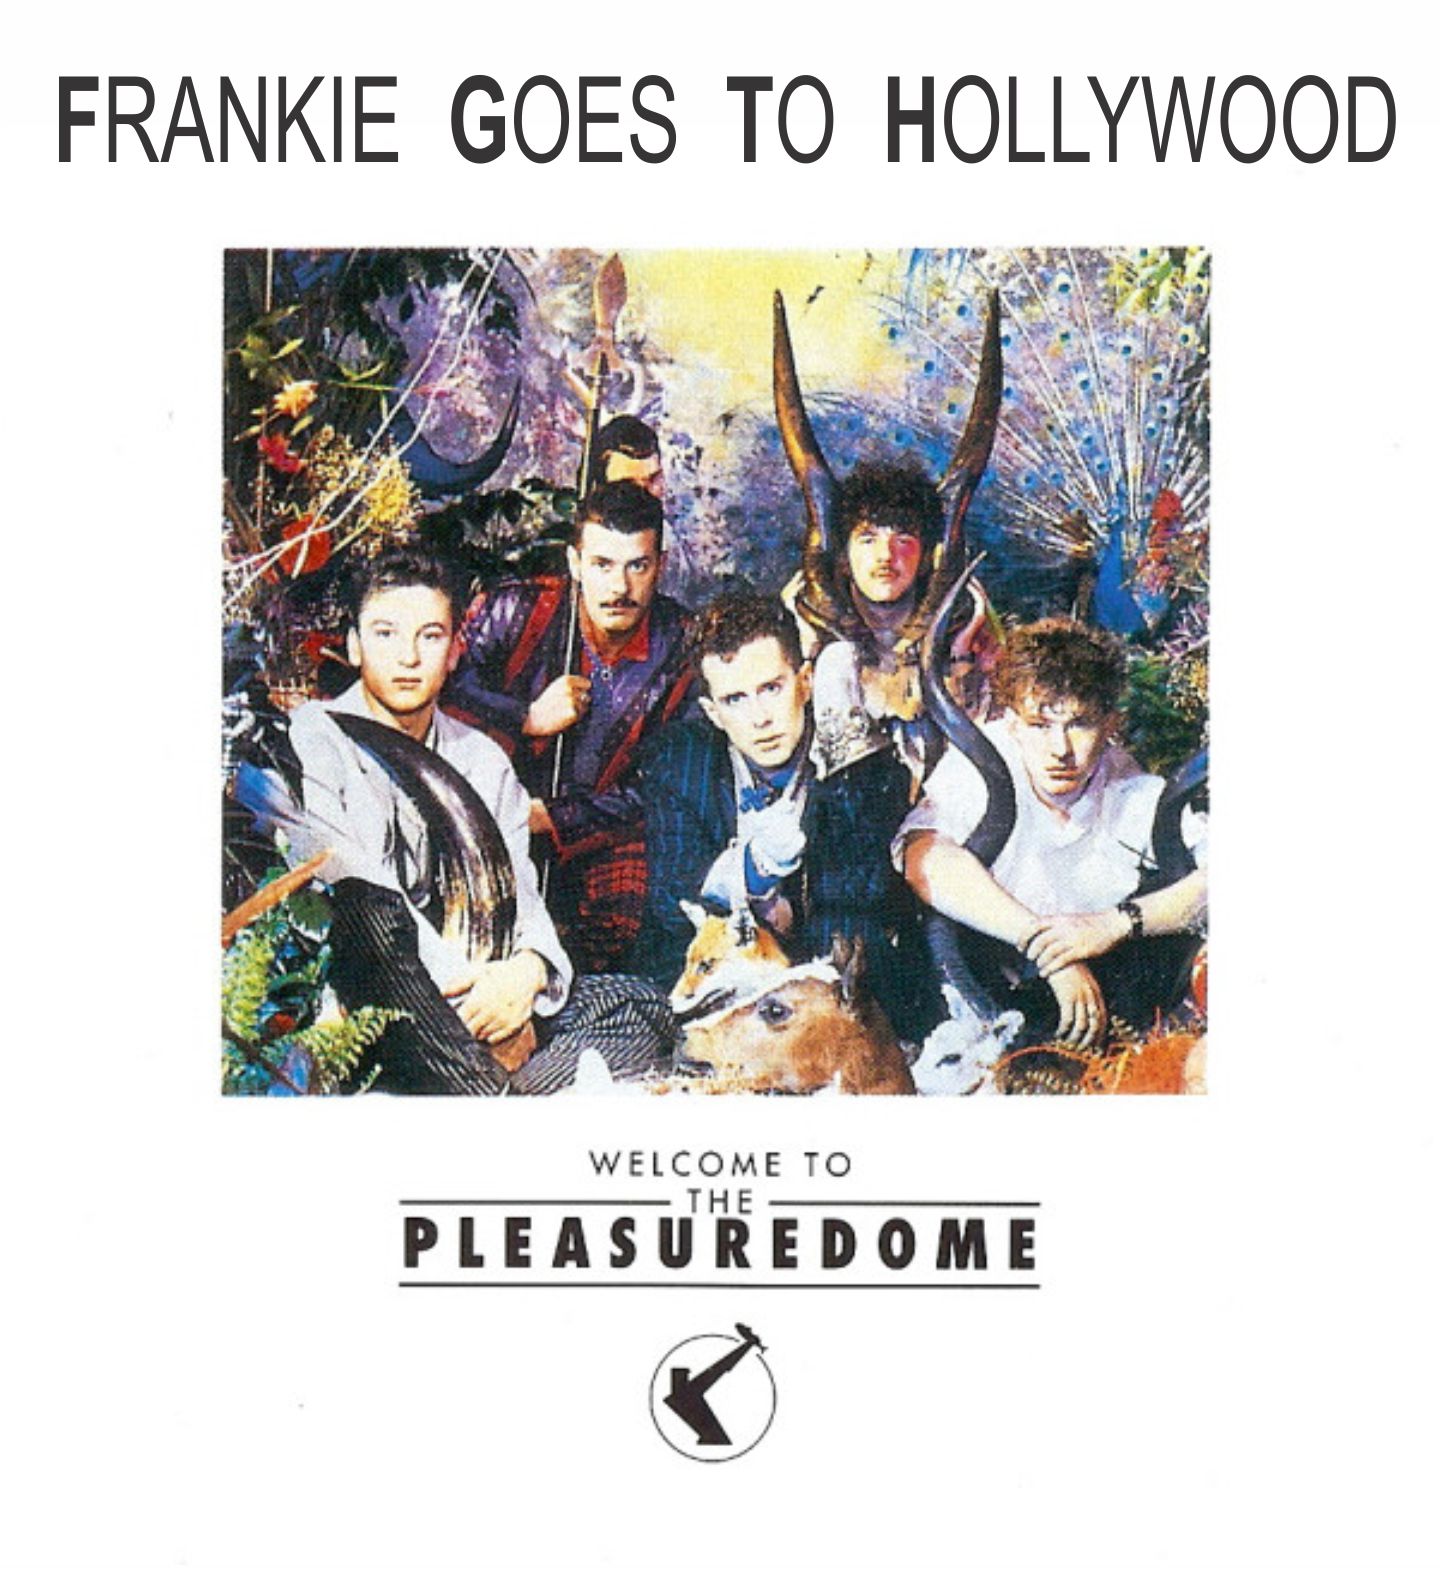 10 The Best Frankie Goes To Hollywood Album Covers - richtercollective.com